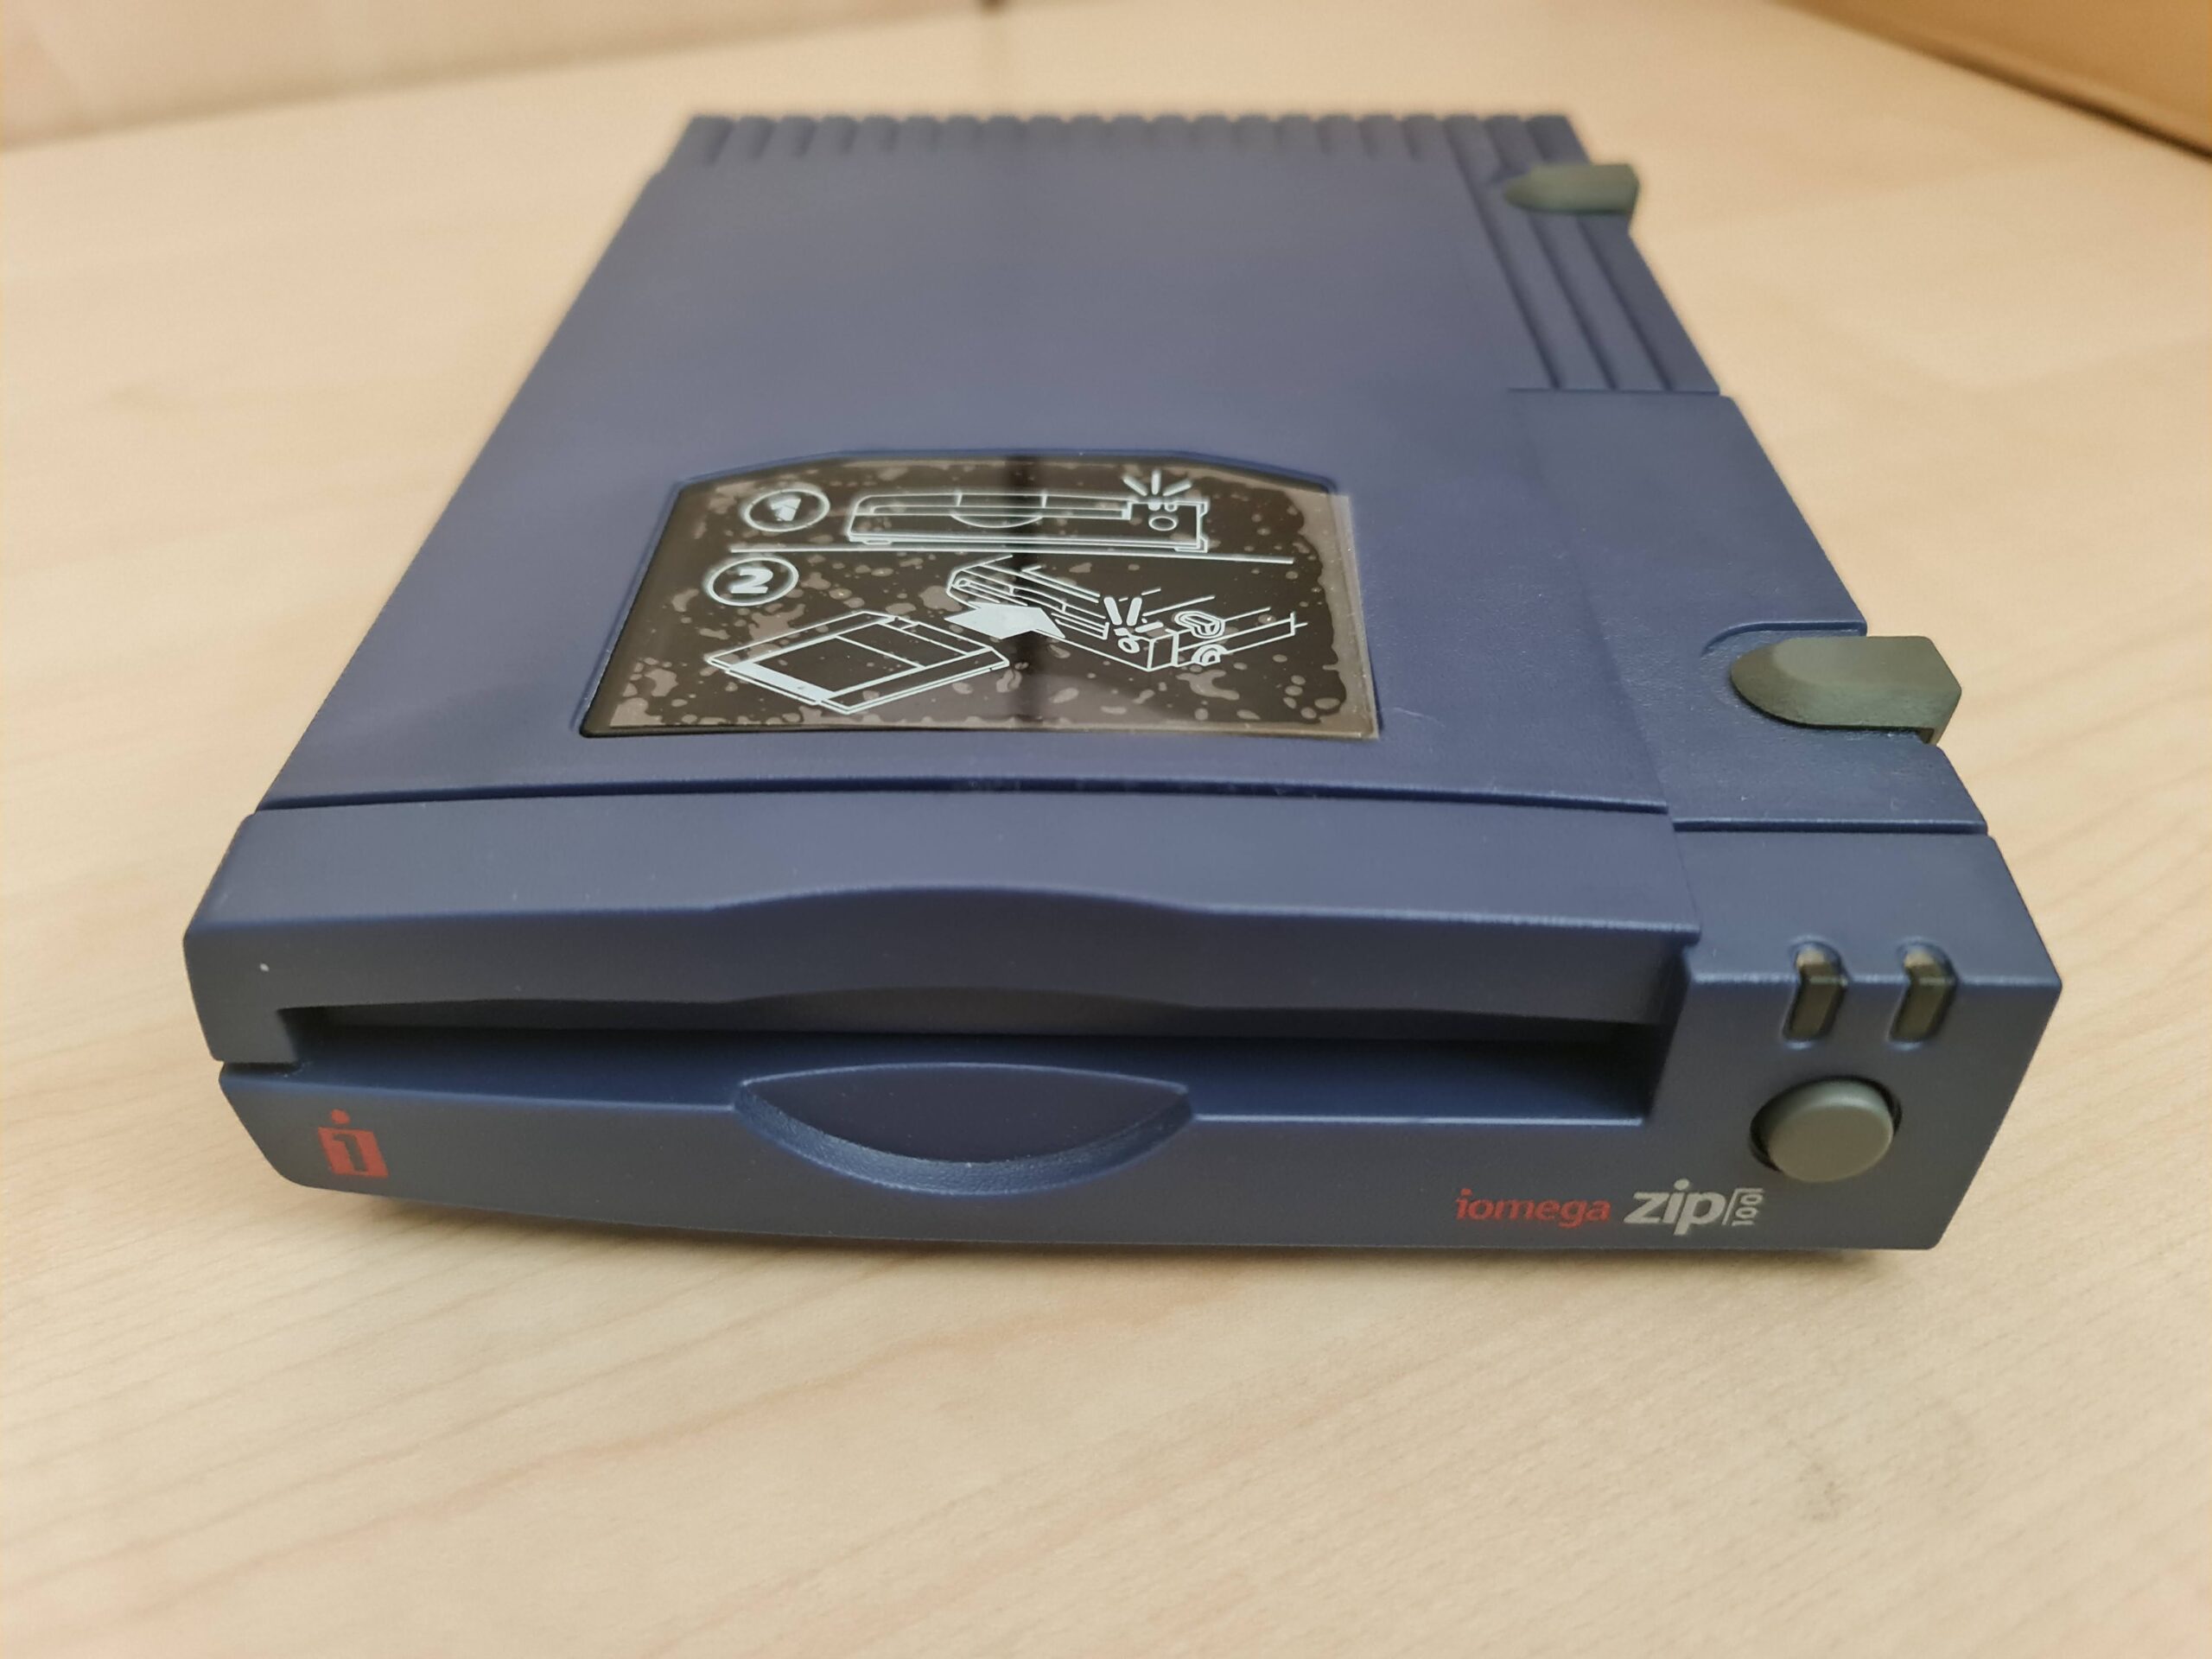 How to use an Iomega Zip Drive with the Amiga A1200 - Lyonsden Blog